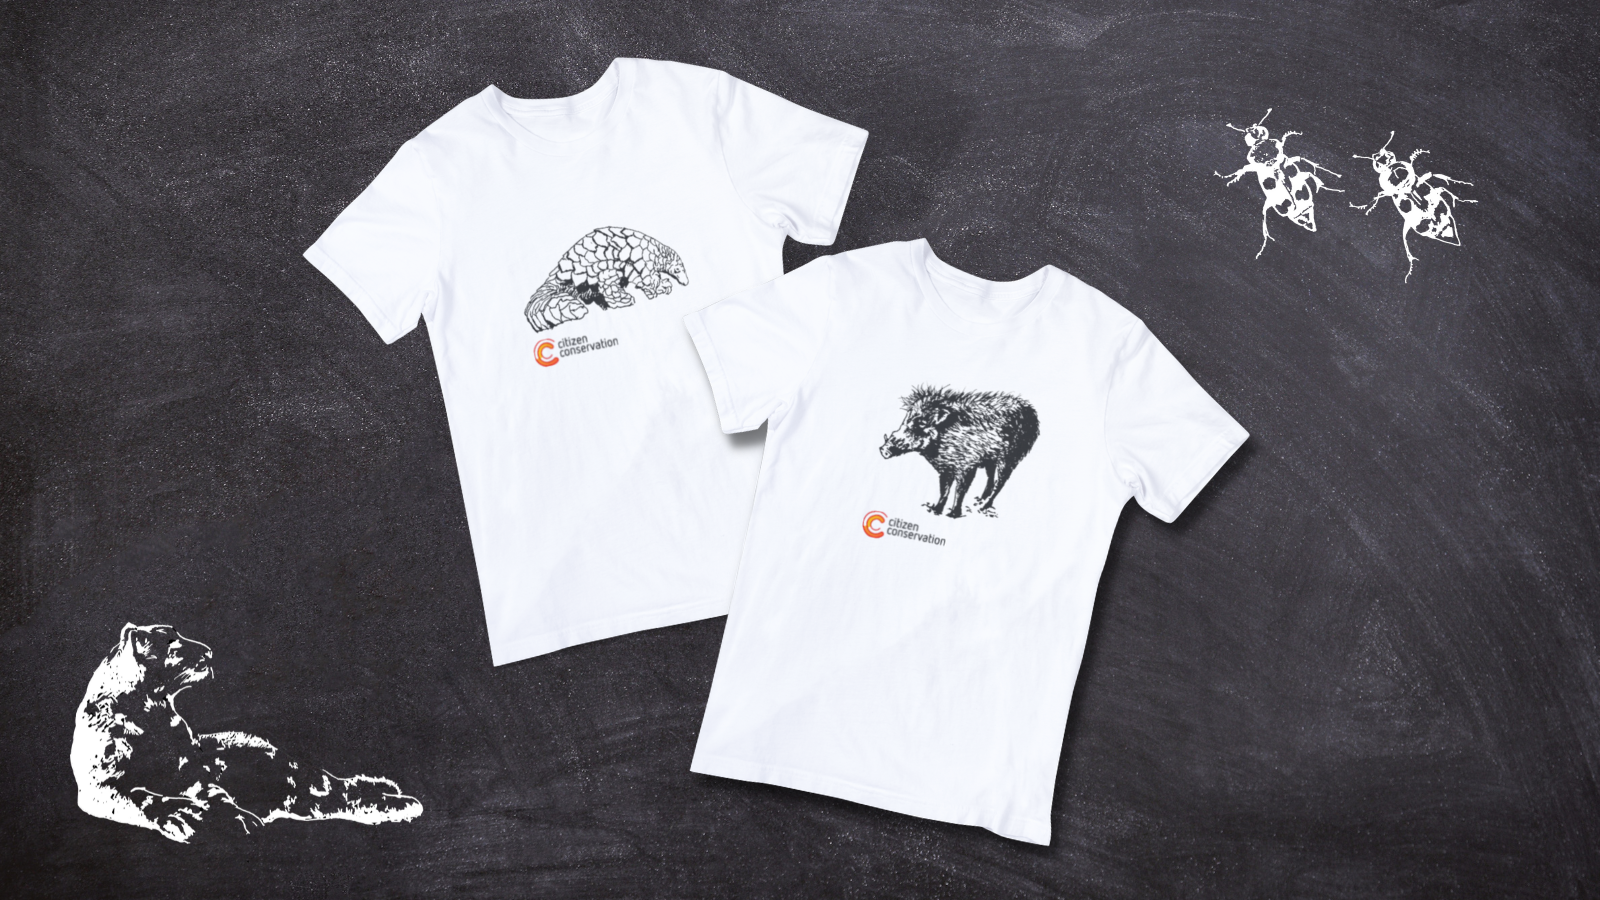 These T-shirts are available as a thank you for a patronage – with a vignette of the favourite animal from the book!